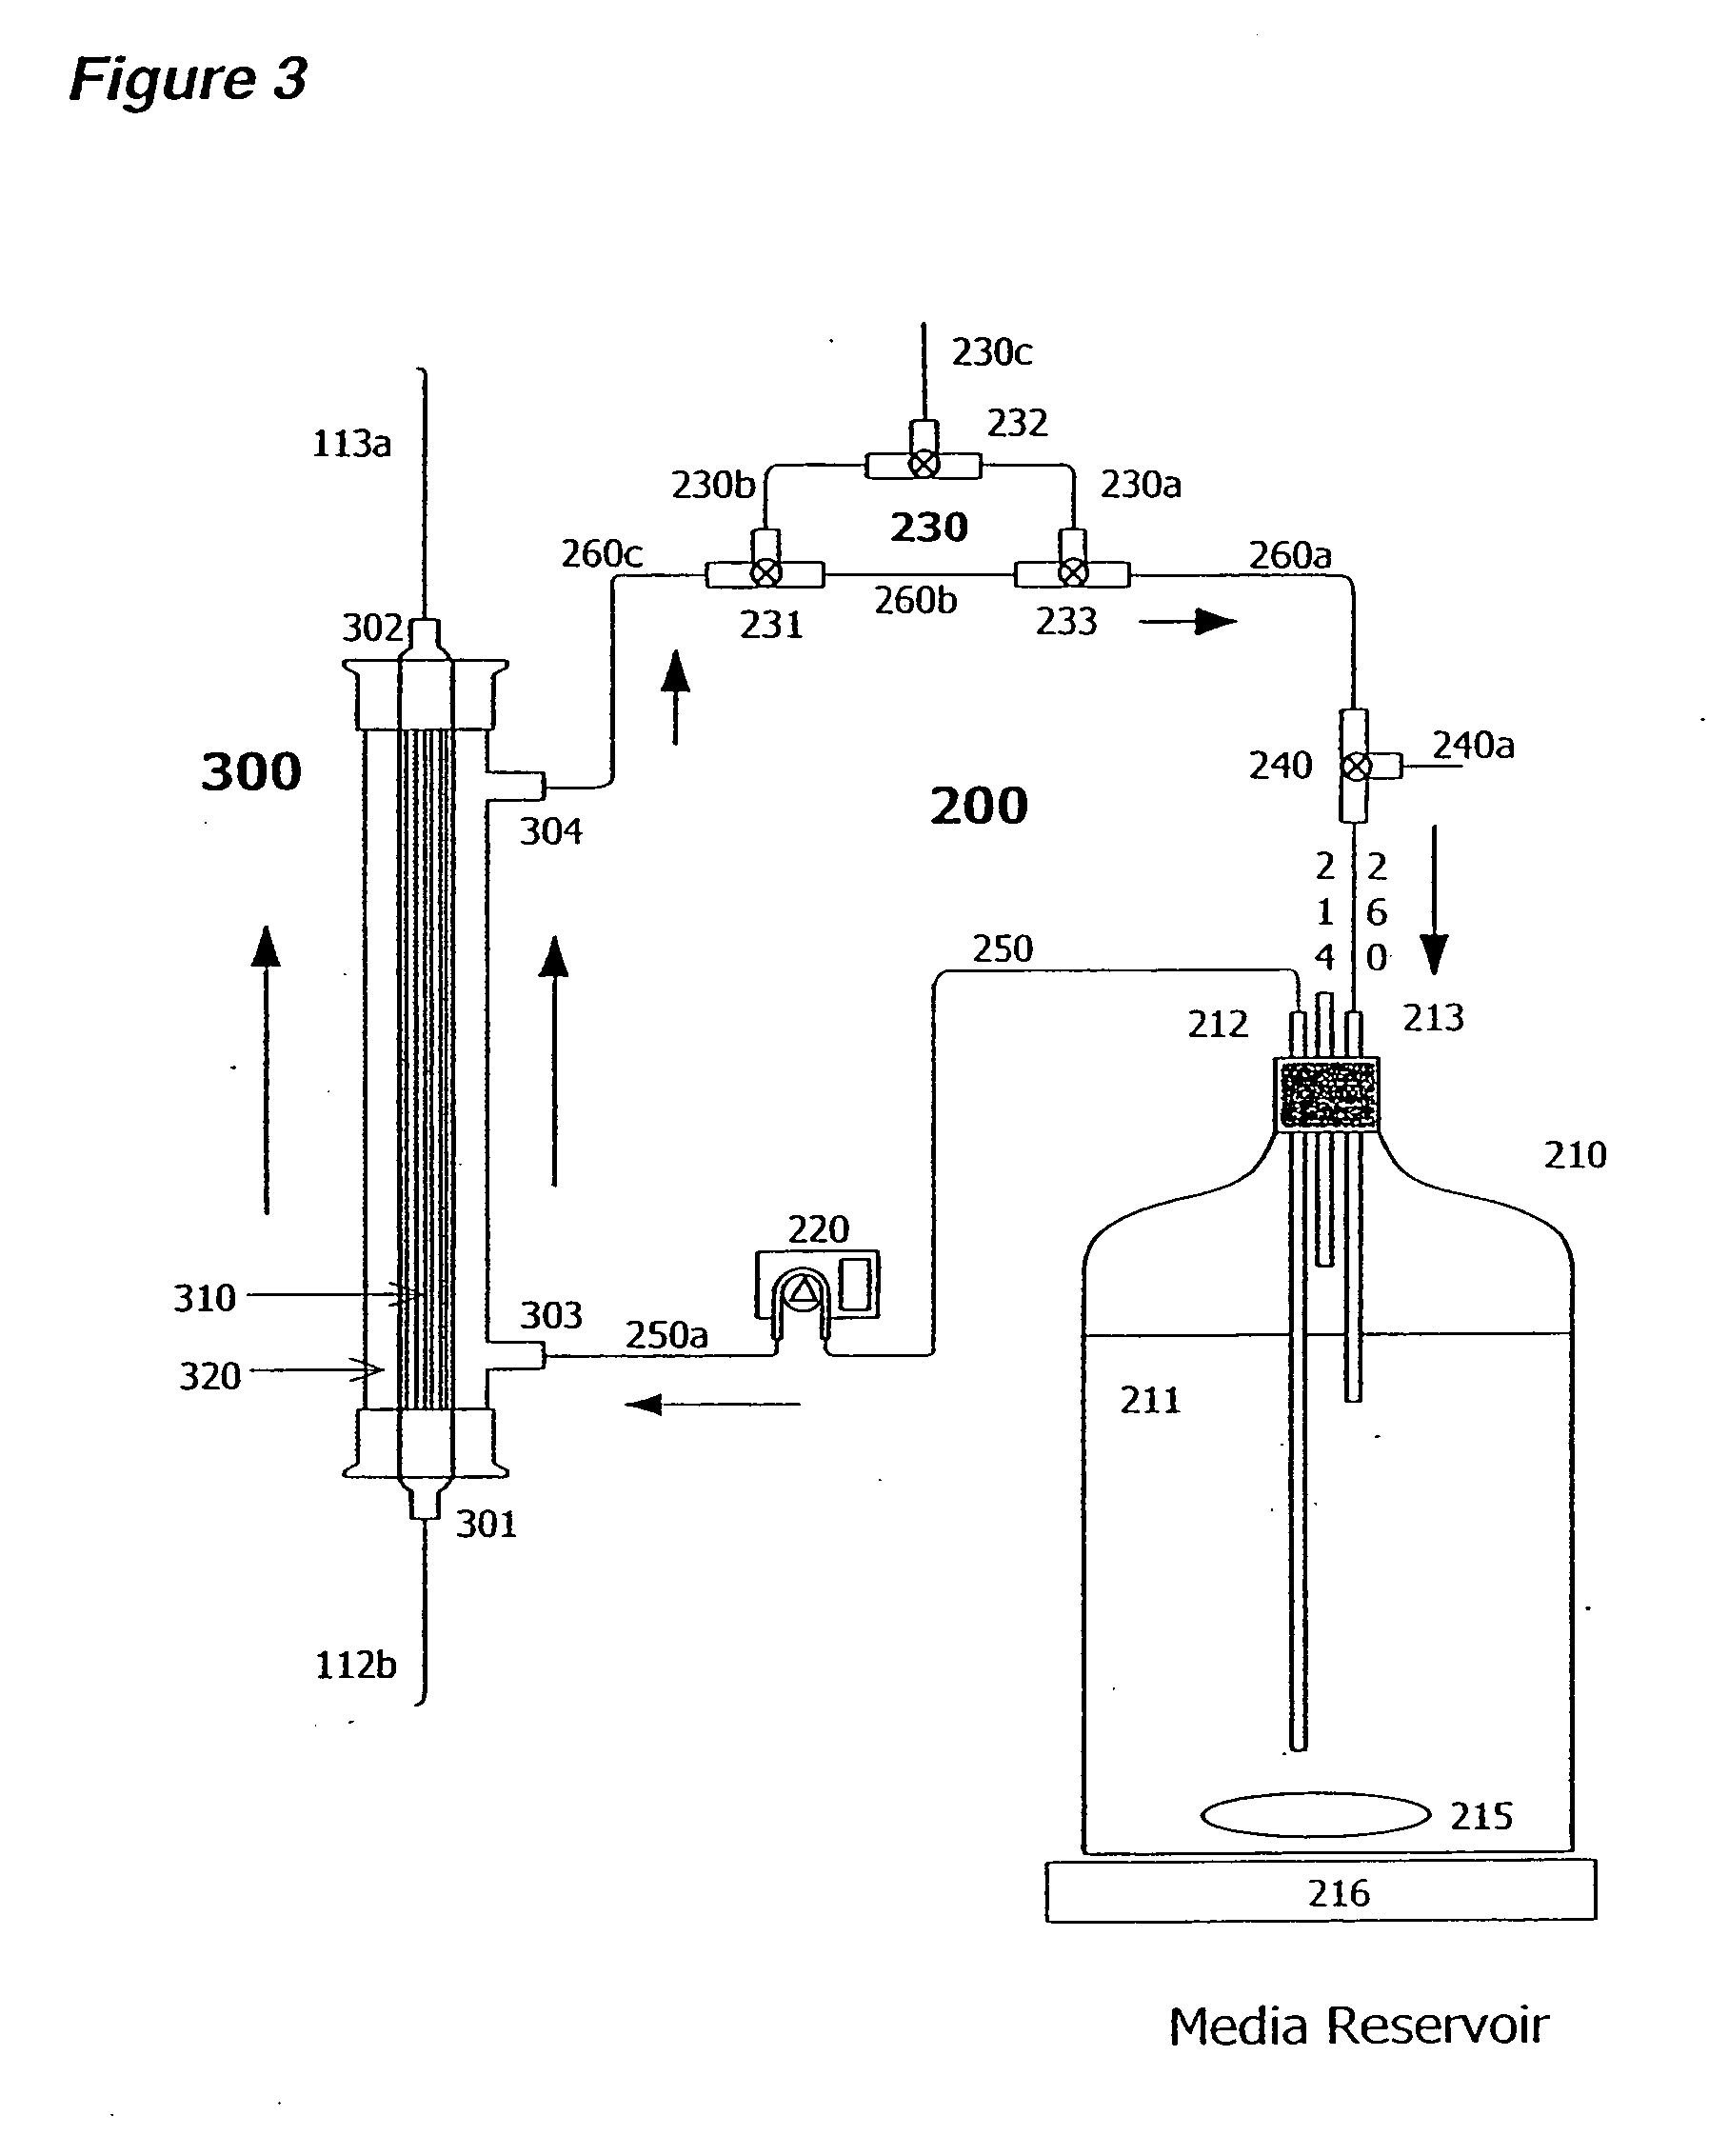 Apparatus and methods for producing and using high-density cells and products therefrom